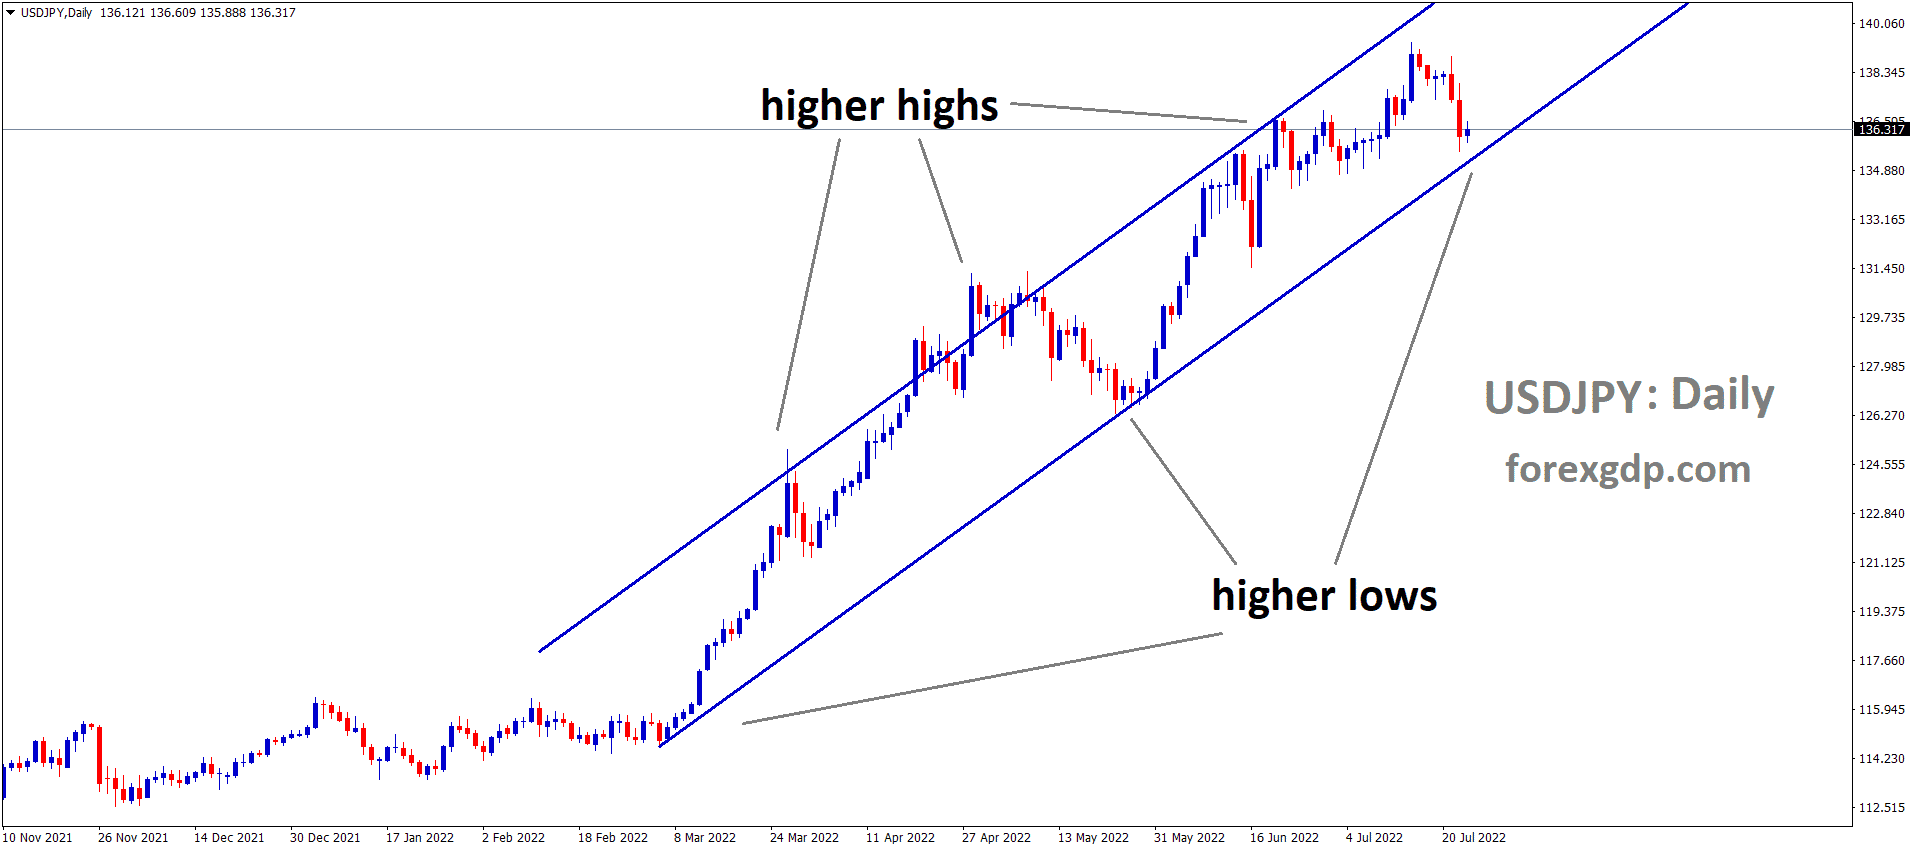 USDJPY is moving in an Ascending channel and the Market has reached the higher low area of the channel